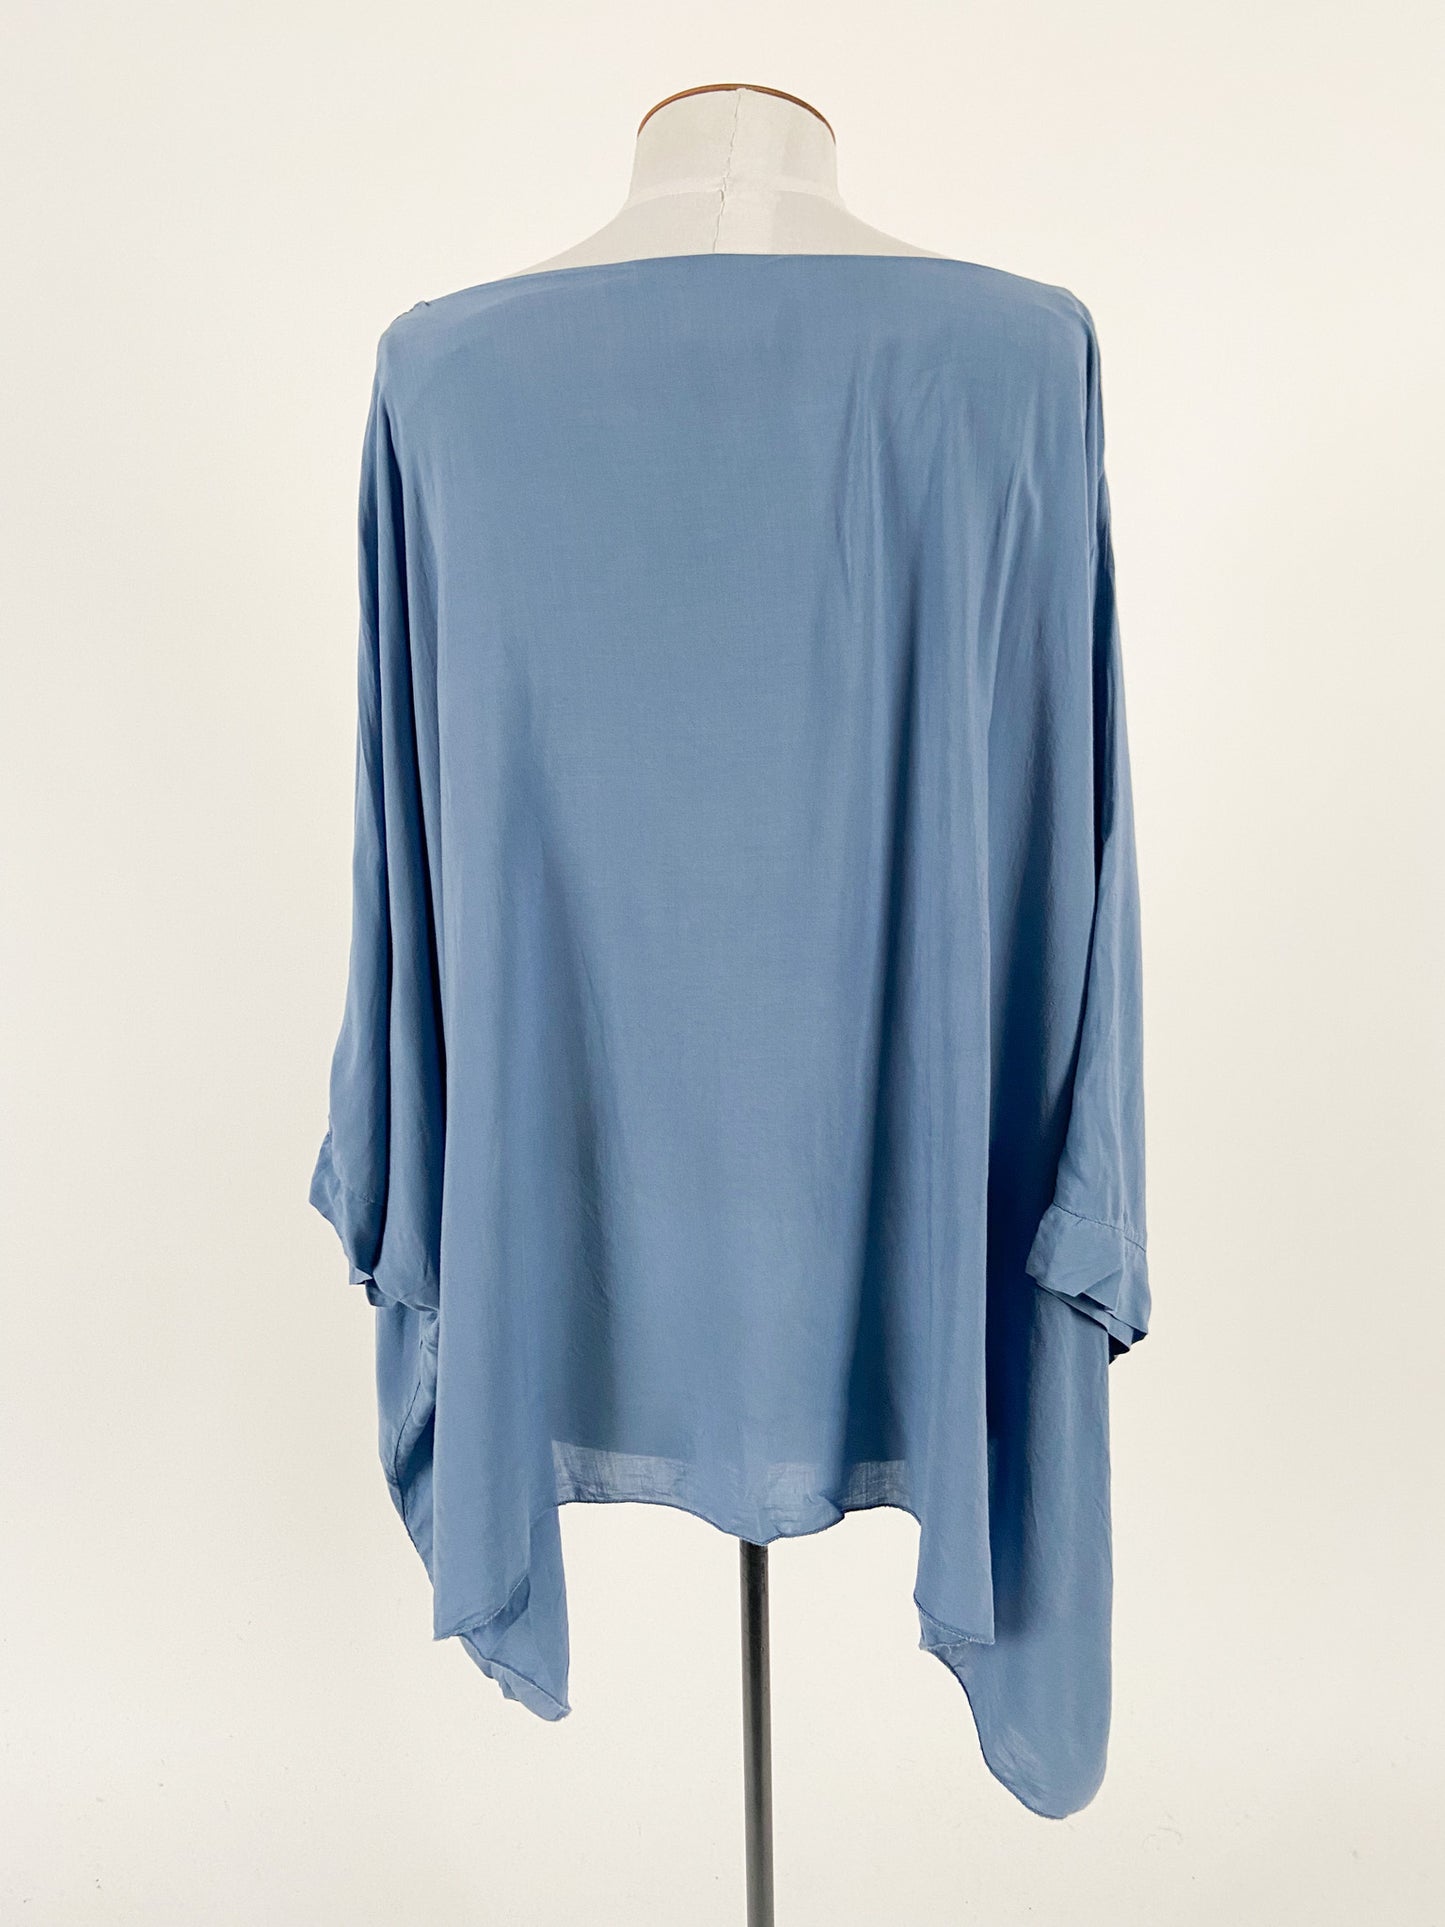 A. Browns & Co | Blue Casual/Workwear Top | Size L